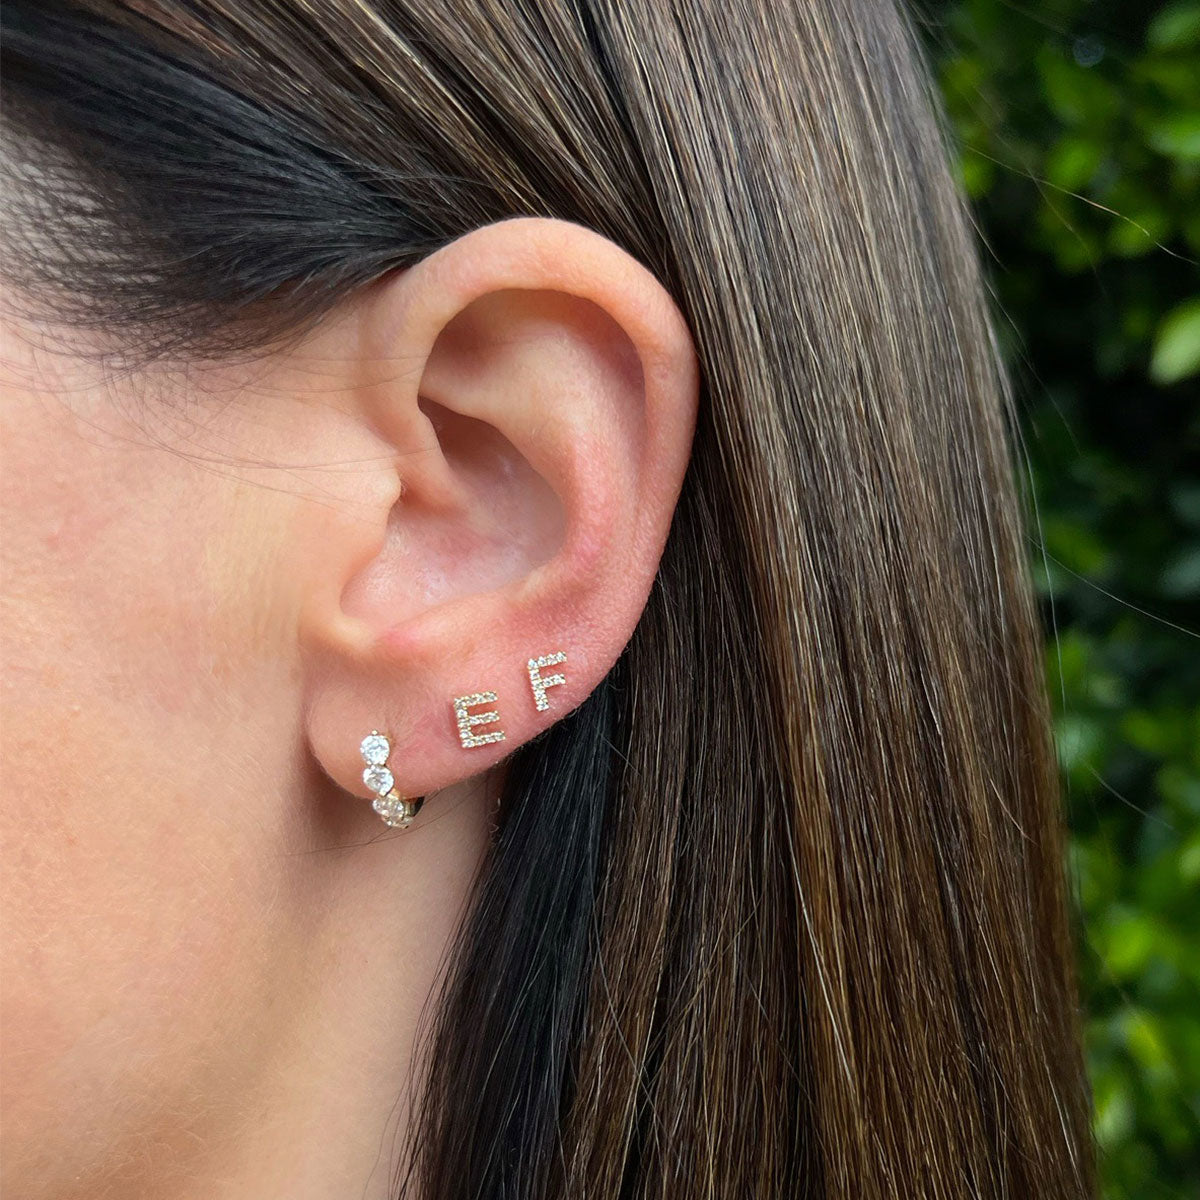 The Initial Set in 14k Yellow Gold Styled on Ear with E and F Initial Studs